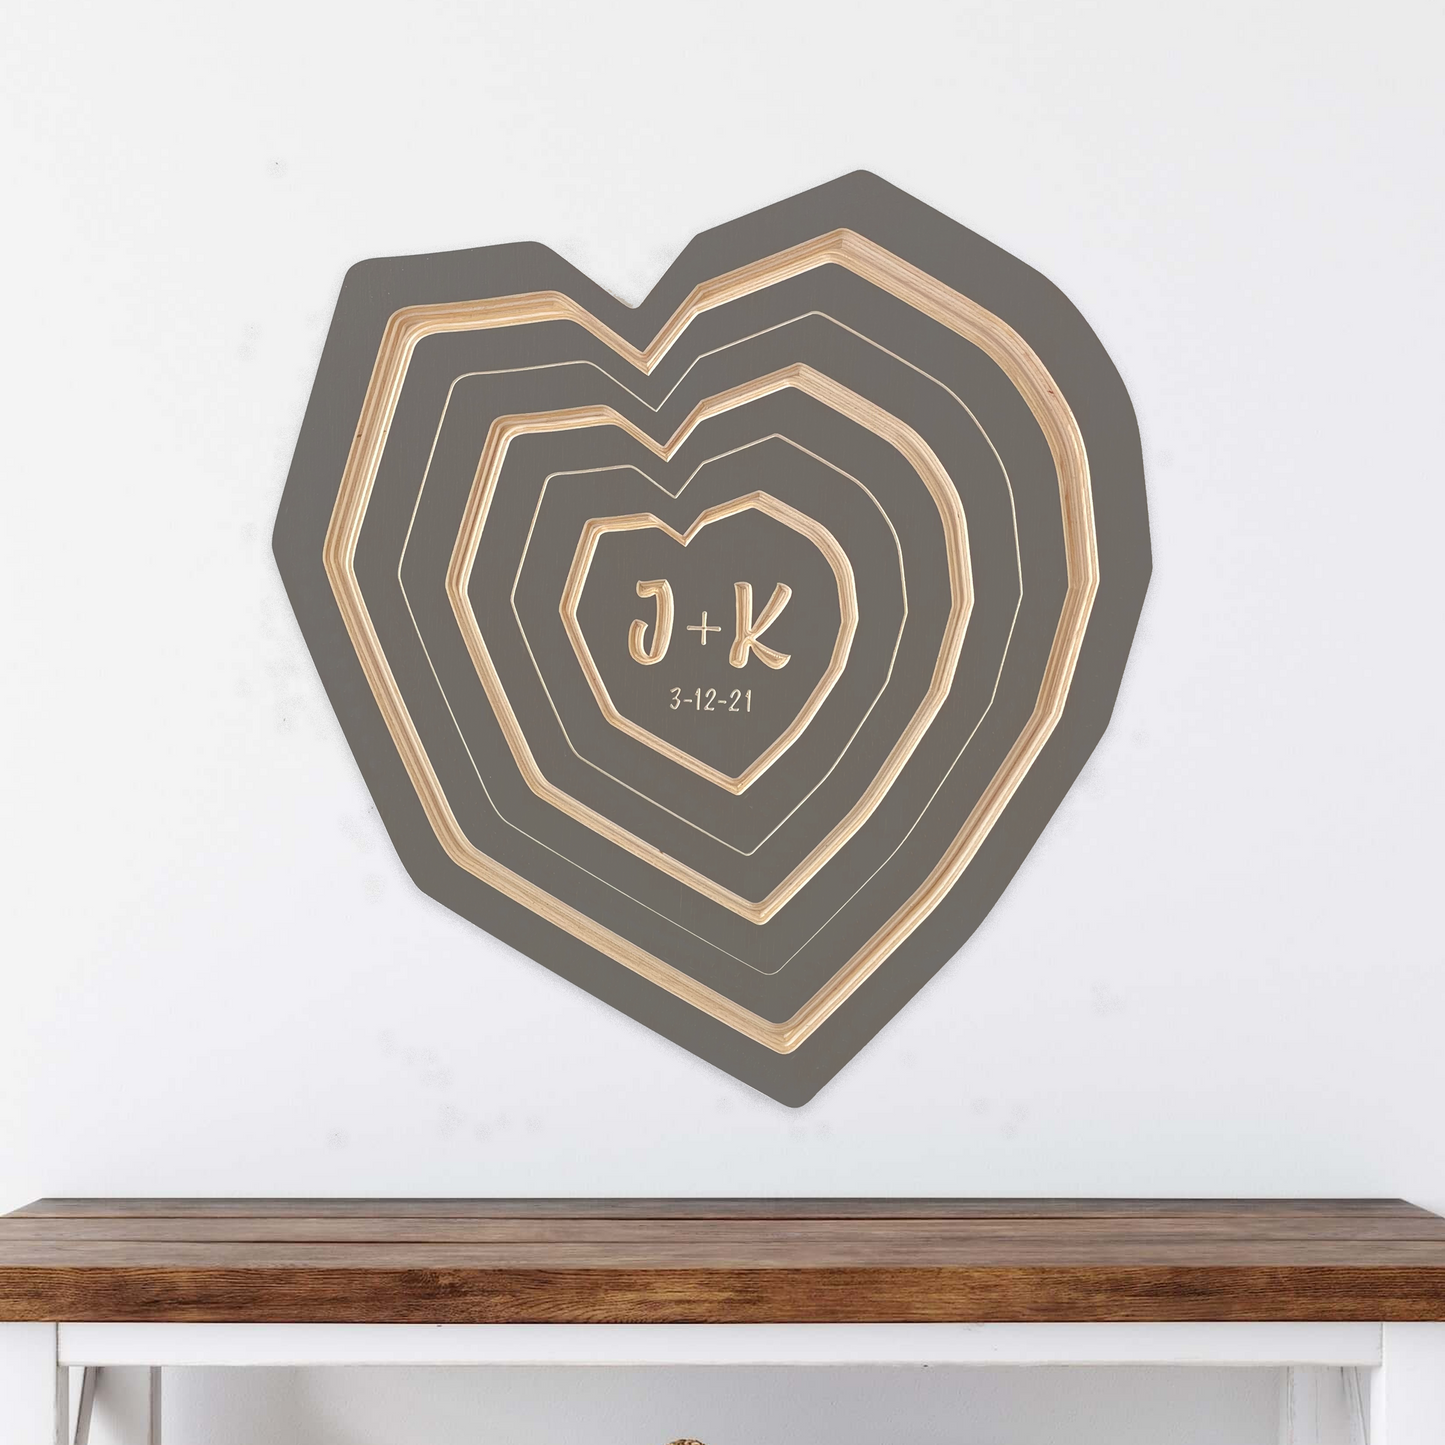 Initials Carved in Wooden Heart | Bespoke Art Made from Wood